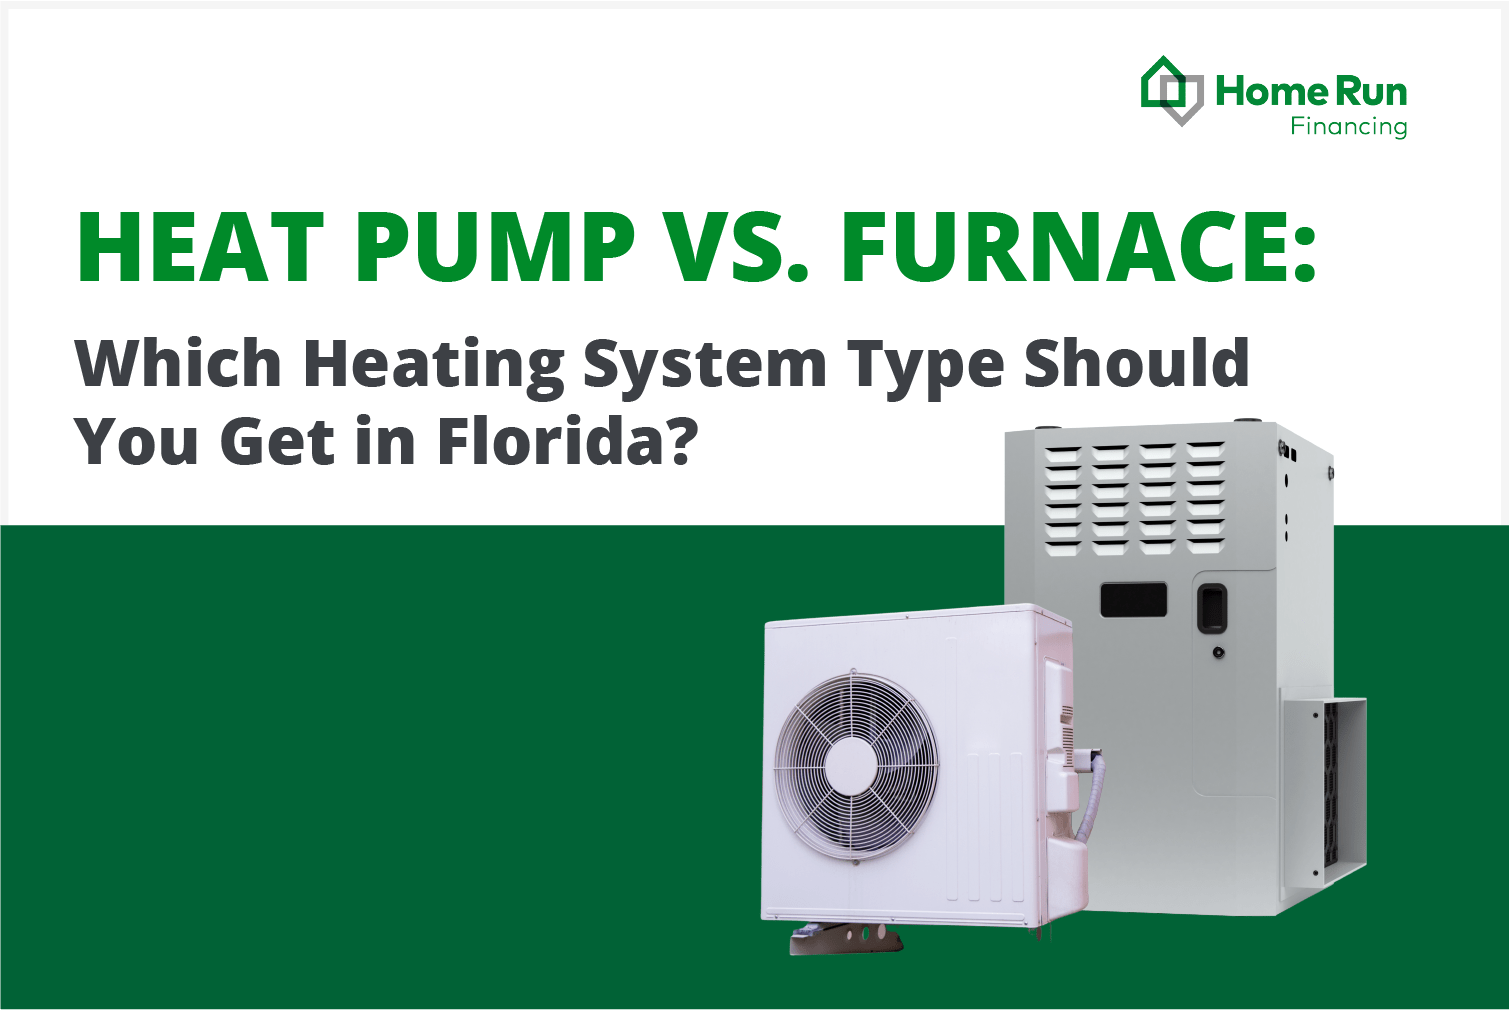 Heat pump vs. furnace: which heating should you get in Florida?